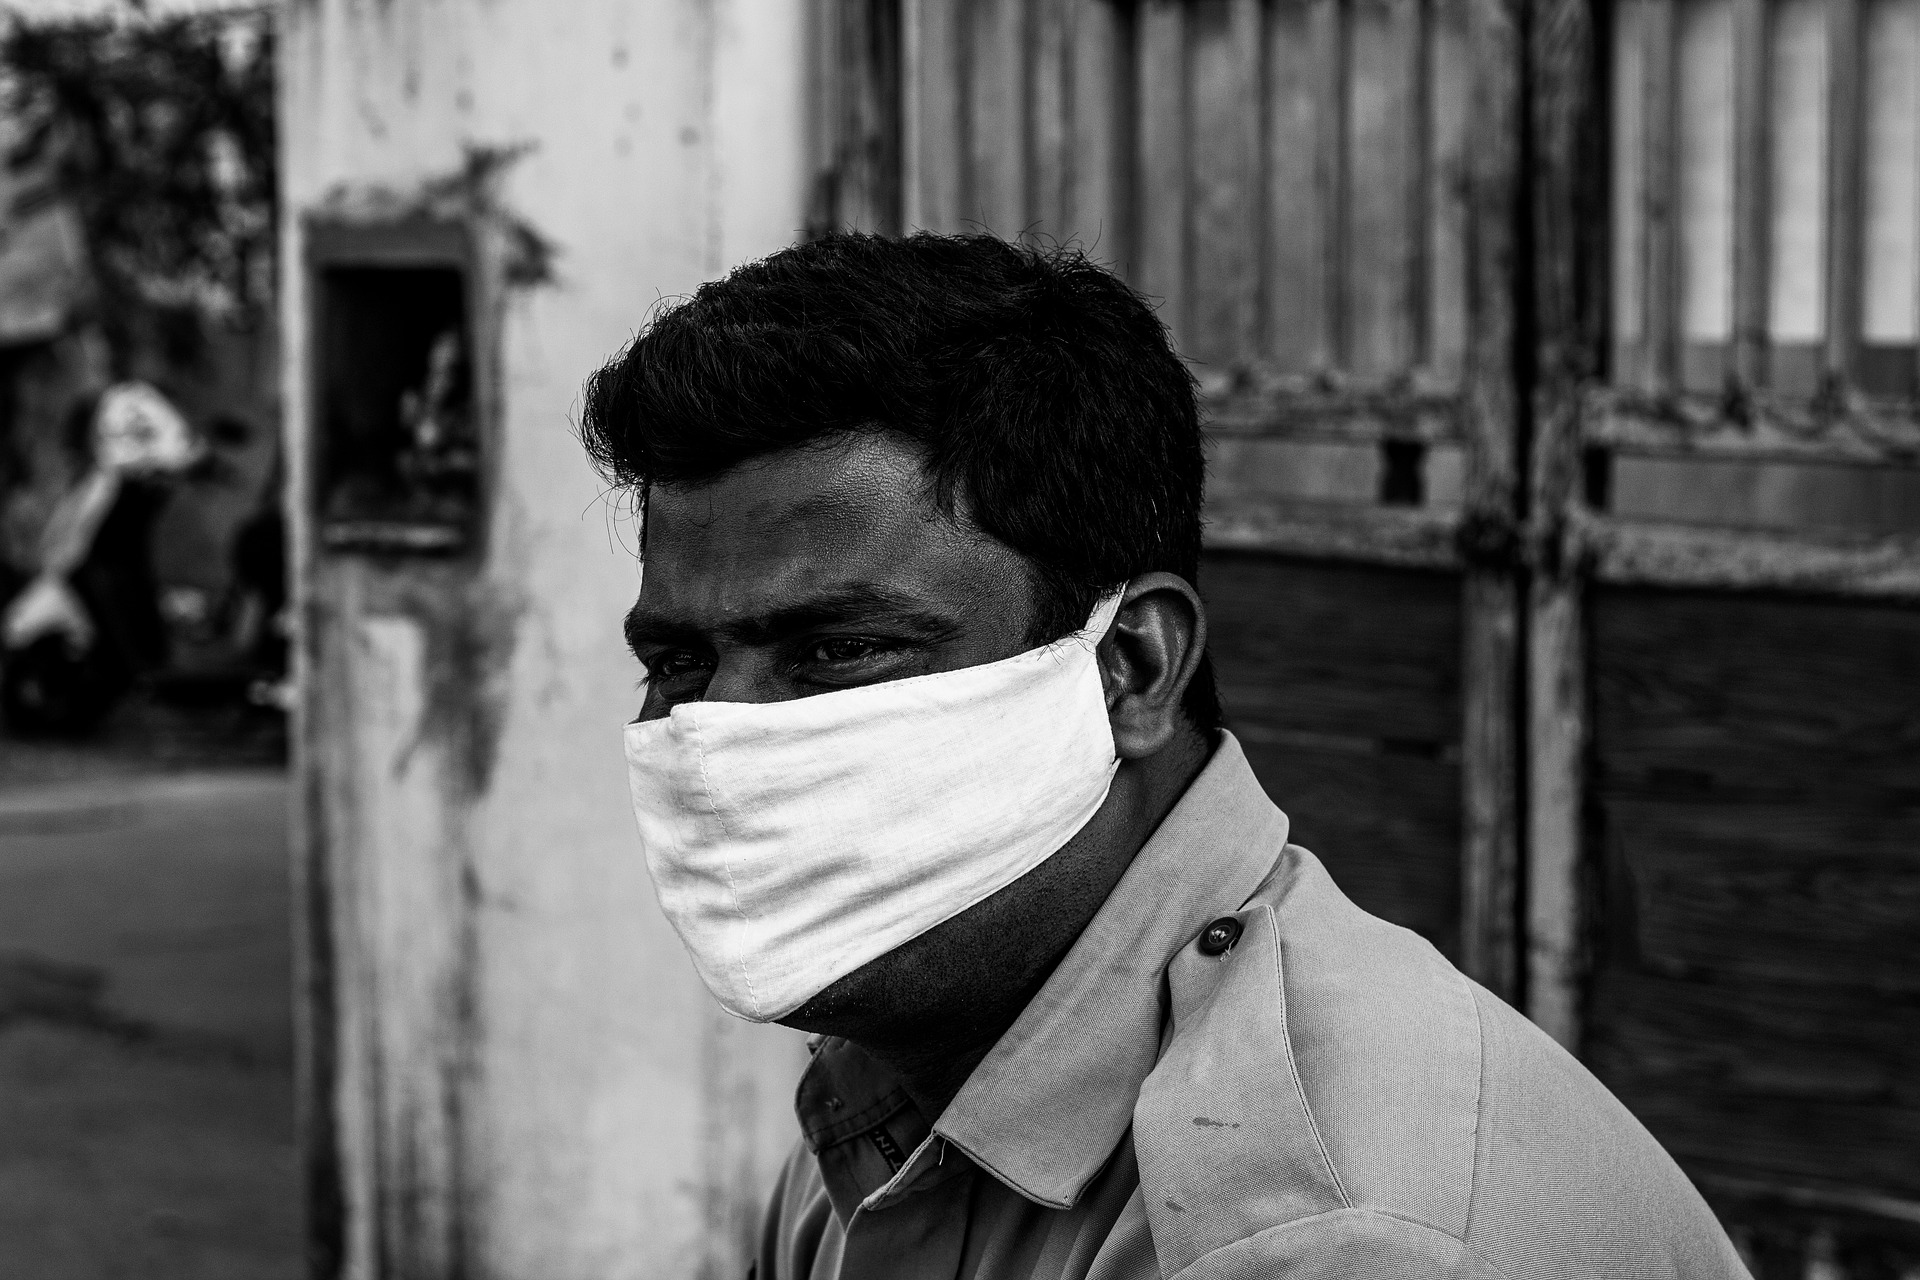 Kerala will withdraw cases registered for Covid-19 lockdown rule violations, like those for not wearing masks. (Creative Commons)